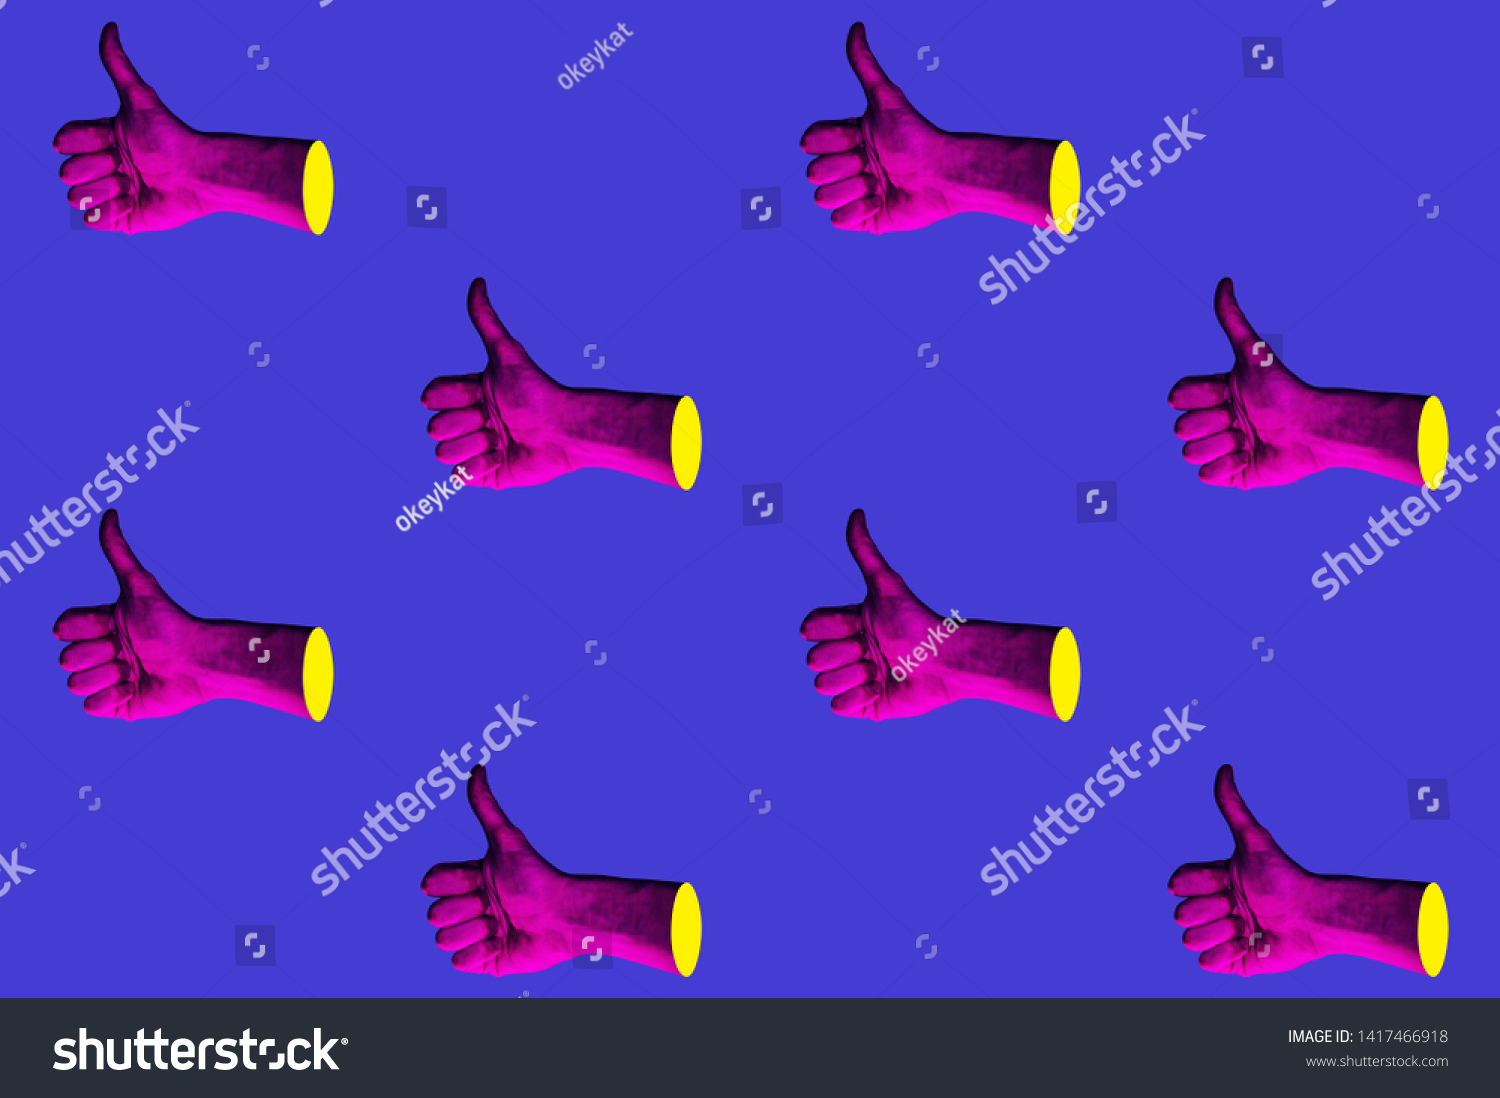 Contemporary minimalistic art collage in neon bold colors with hands showing thumbs up. Like sign surrealism creative wallpaper. Psychedelic design pattern. Template with space for text.  #1417466918